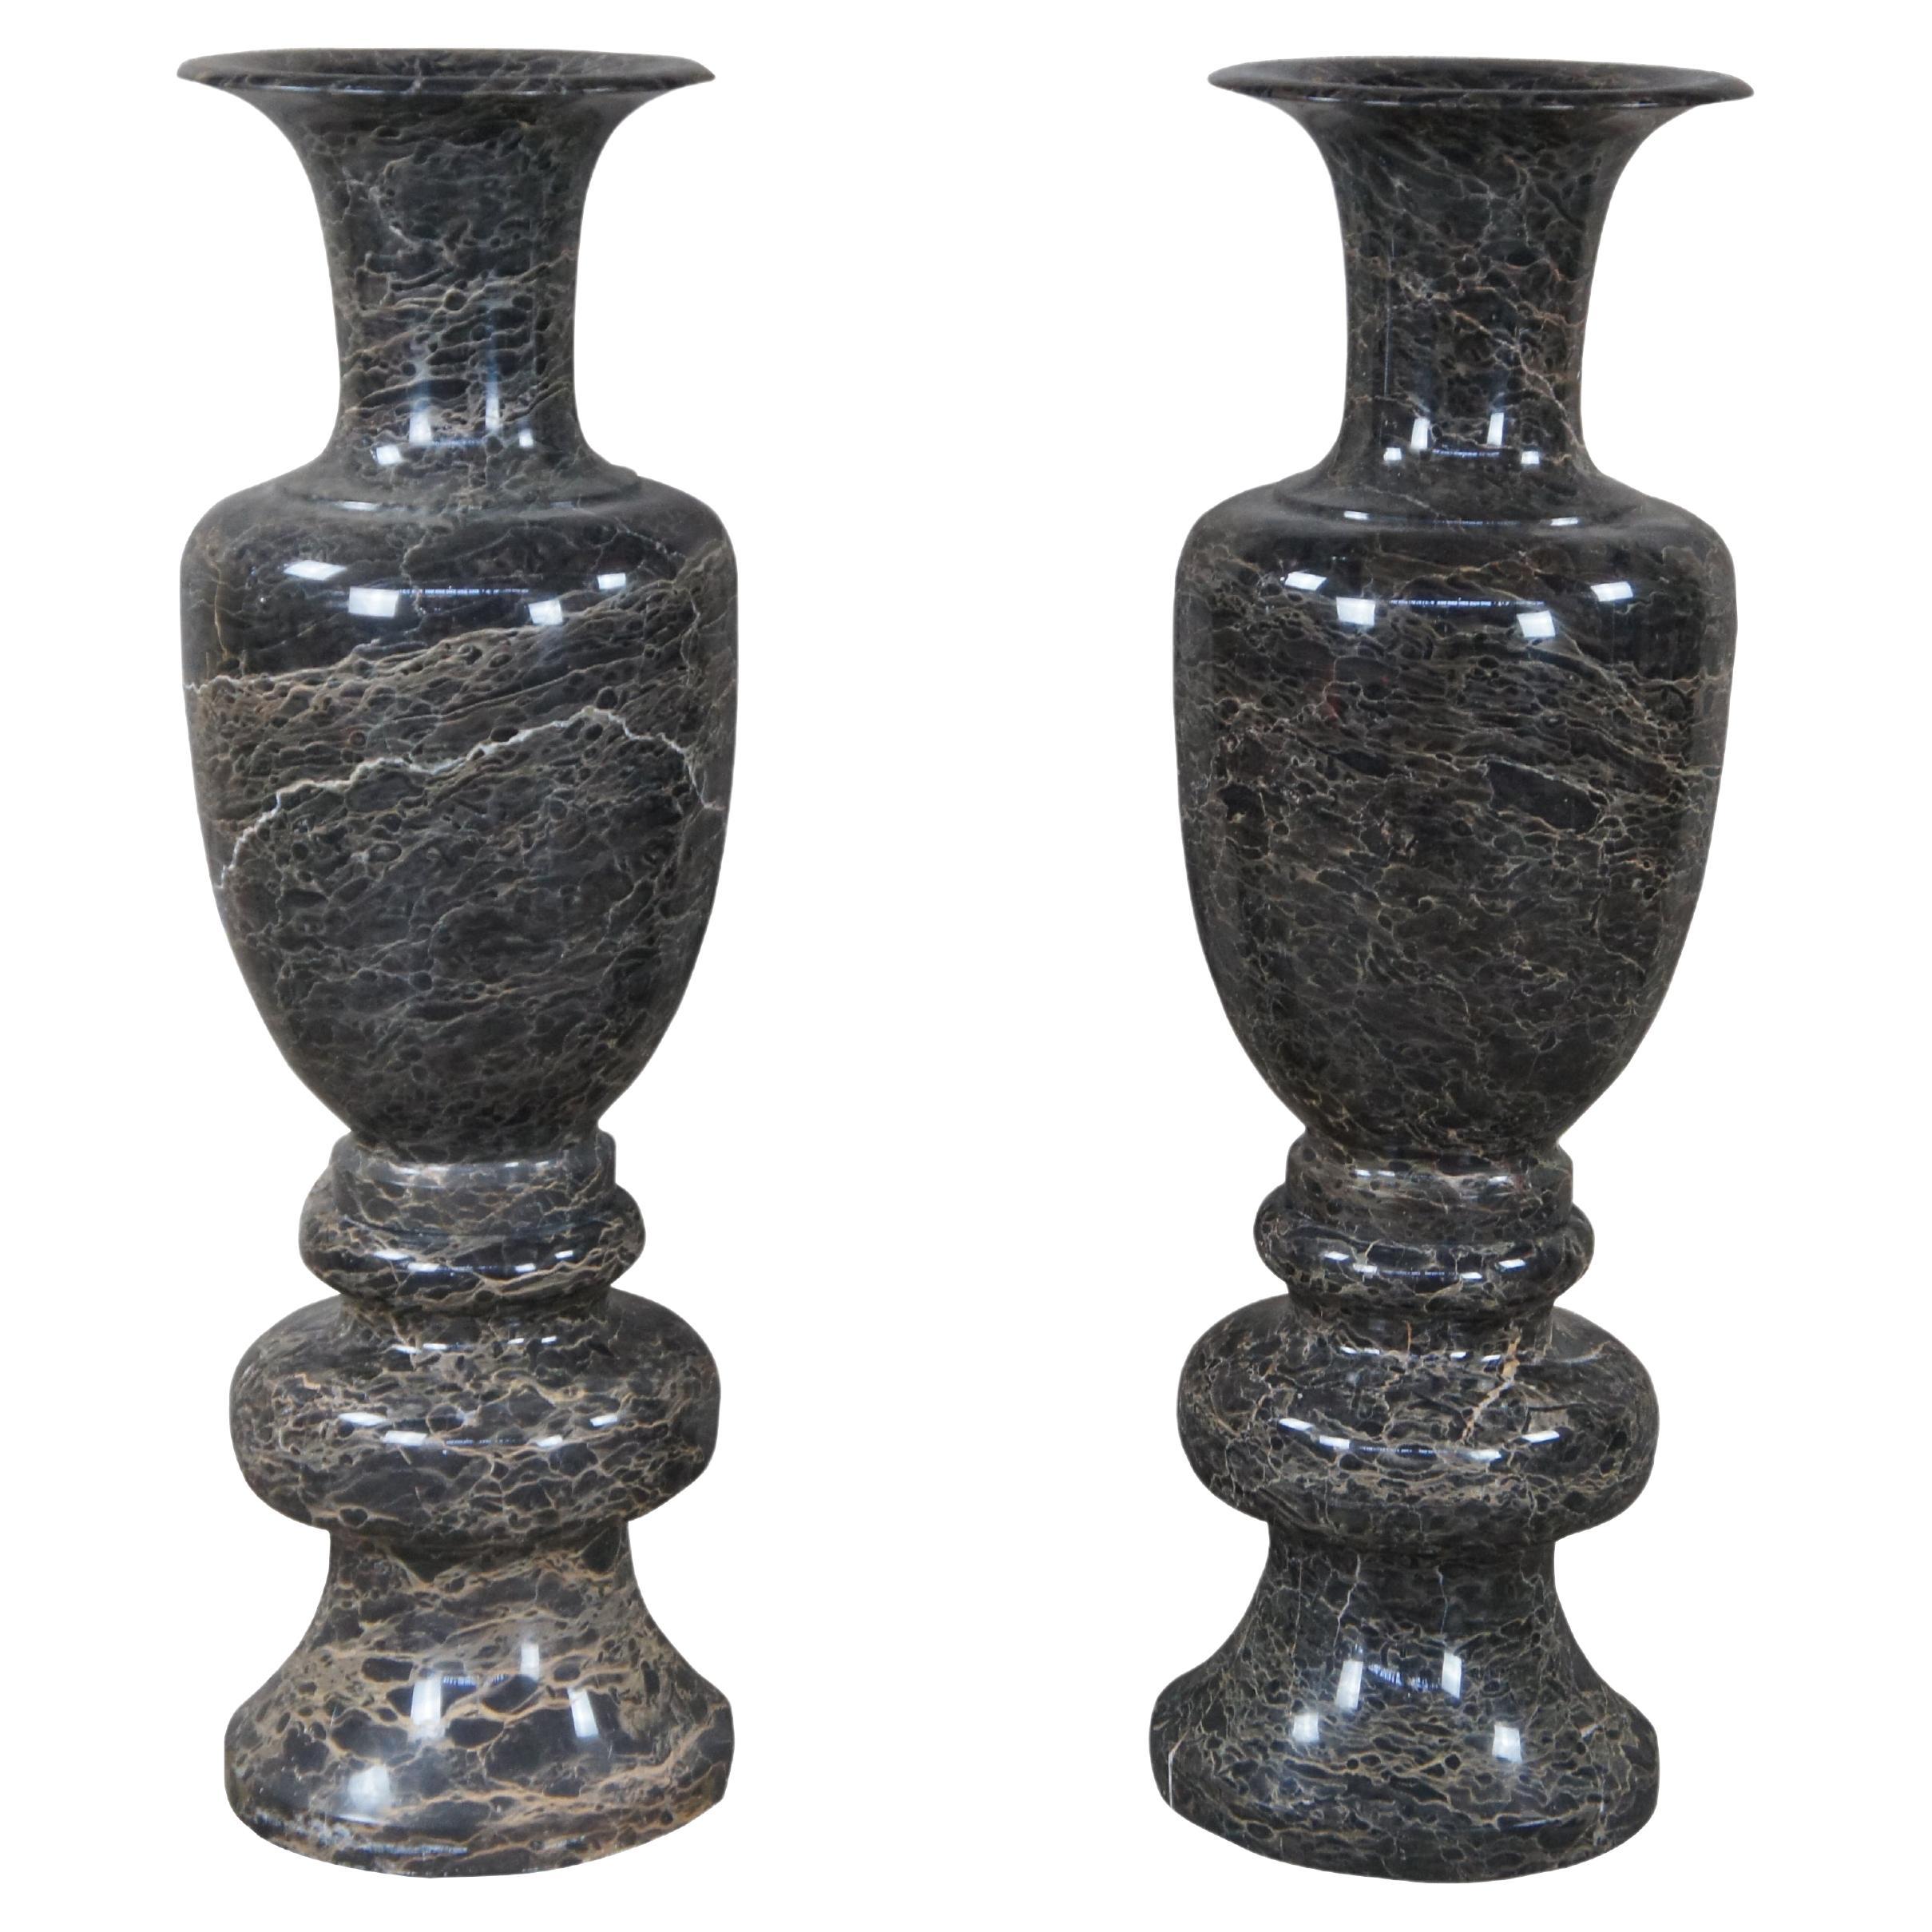 2 Monumental Italian Polished Marble Floor Vases Stand Urns Post Modern Pair 37" For Sale